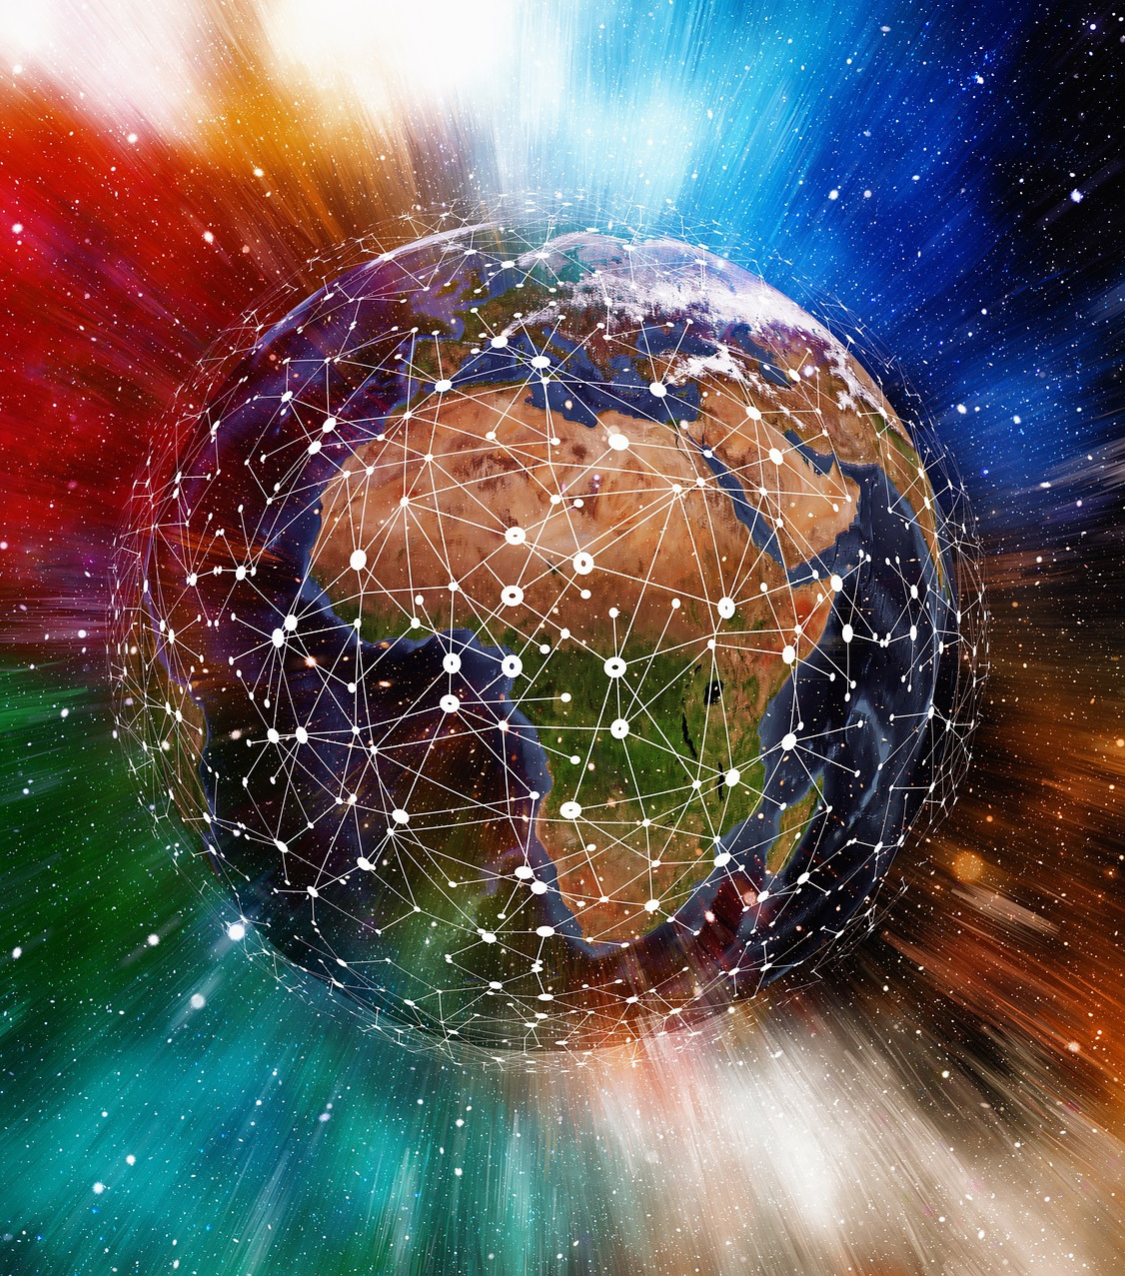 An image of a globe superimposed by an illustration of a network surrounded by rainbow colored light